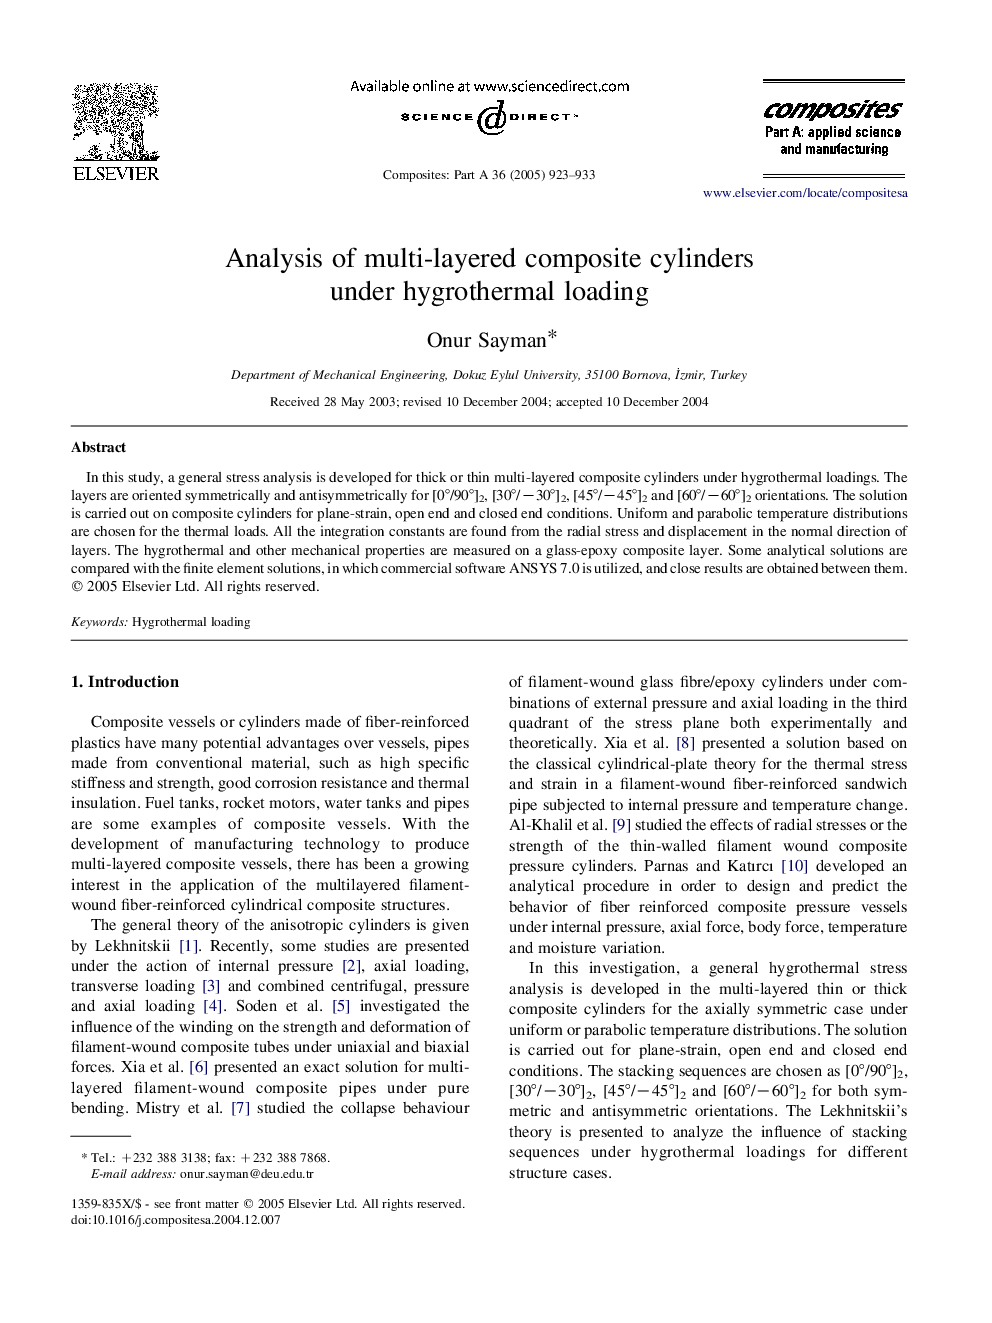 Analysis of multi-layered composite cylinders under hygrothermal loading